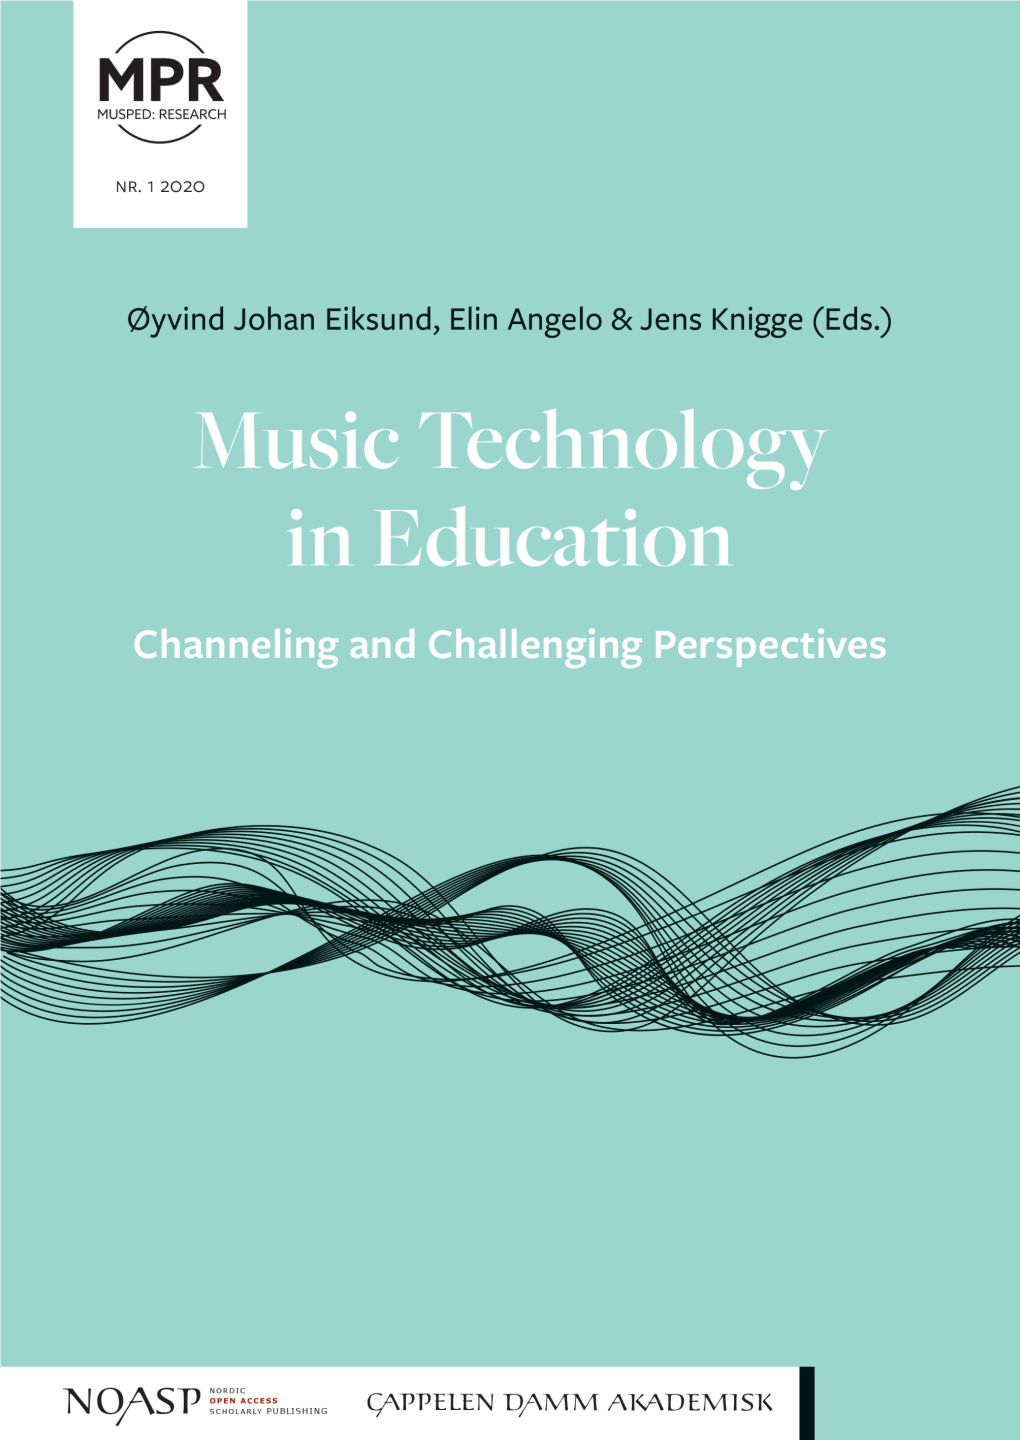 Music Technology in Education CHANNELING and CHALLENGING PERSPECTIVES